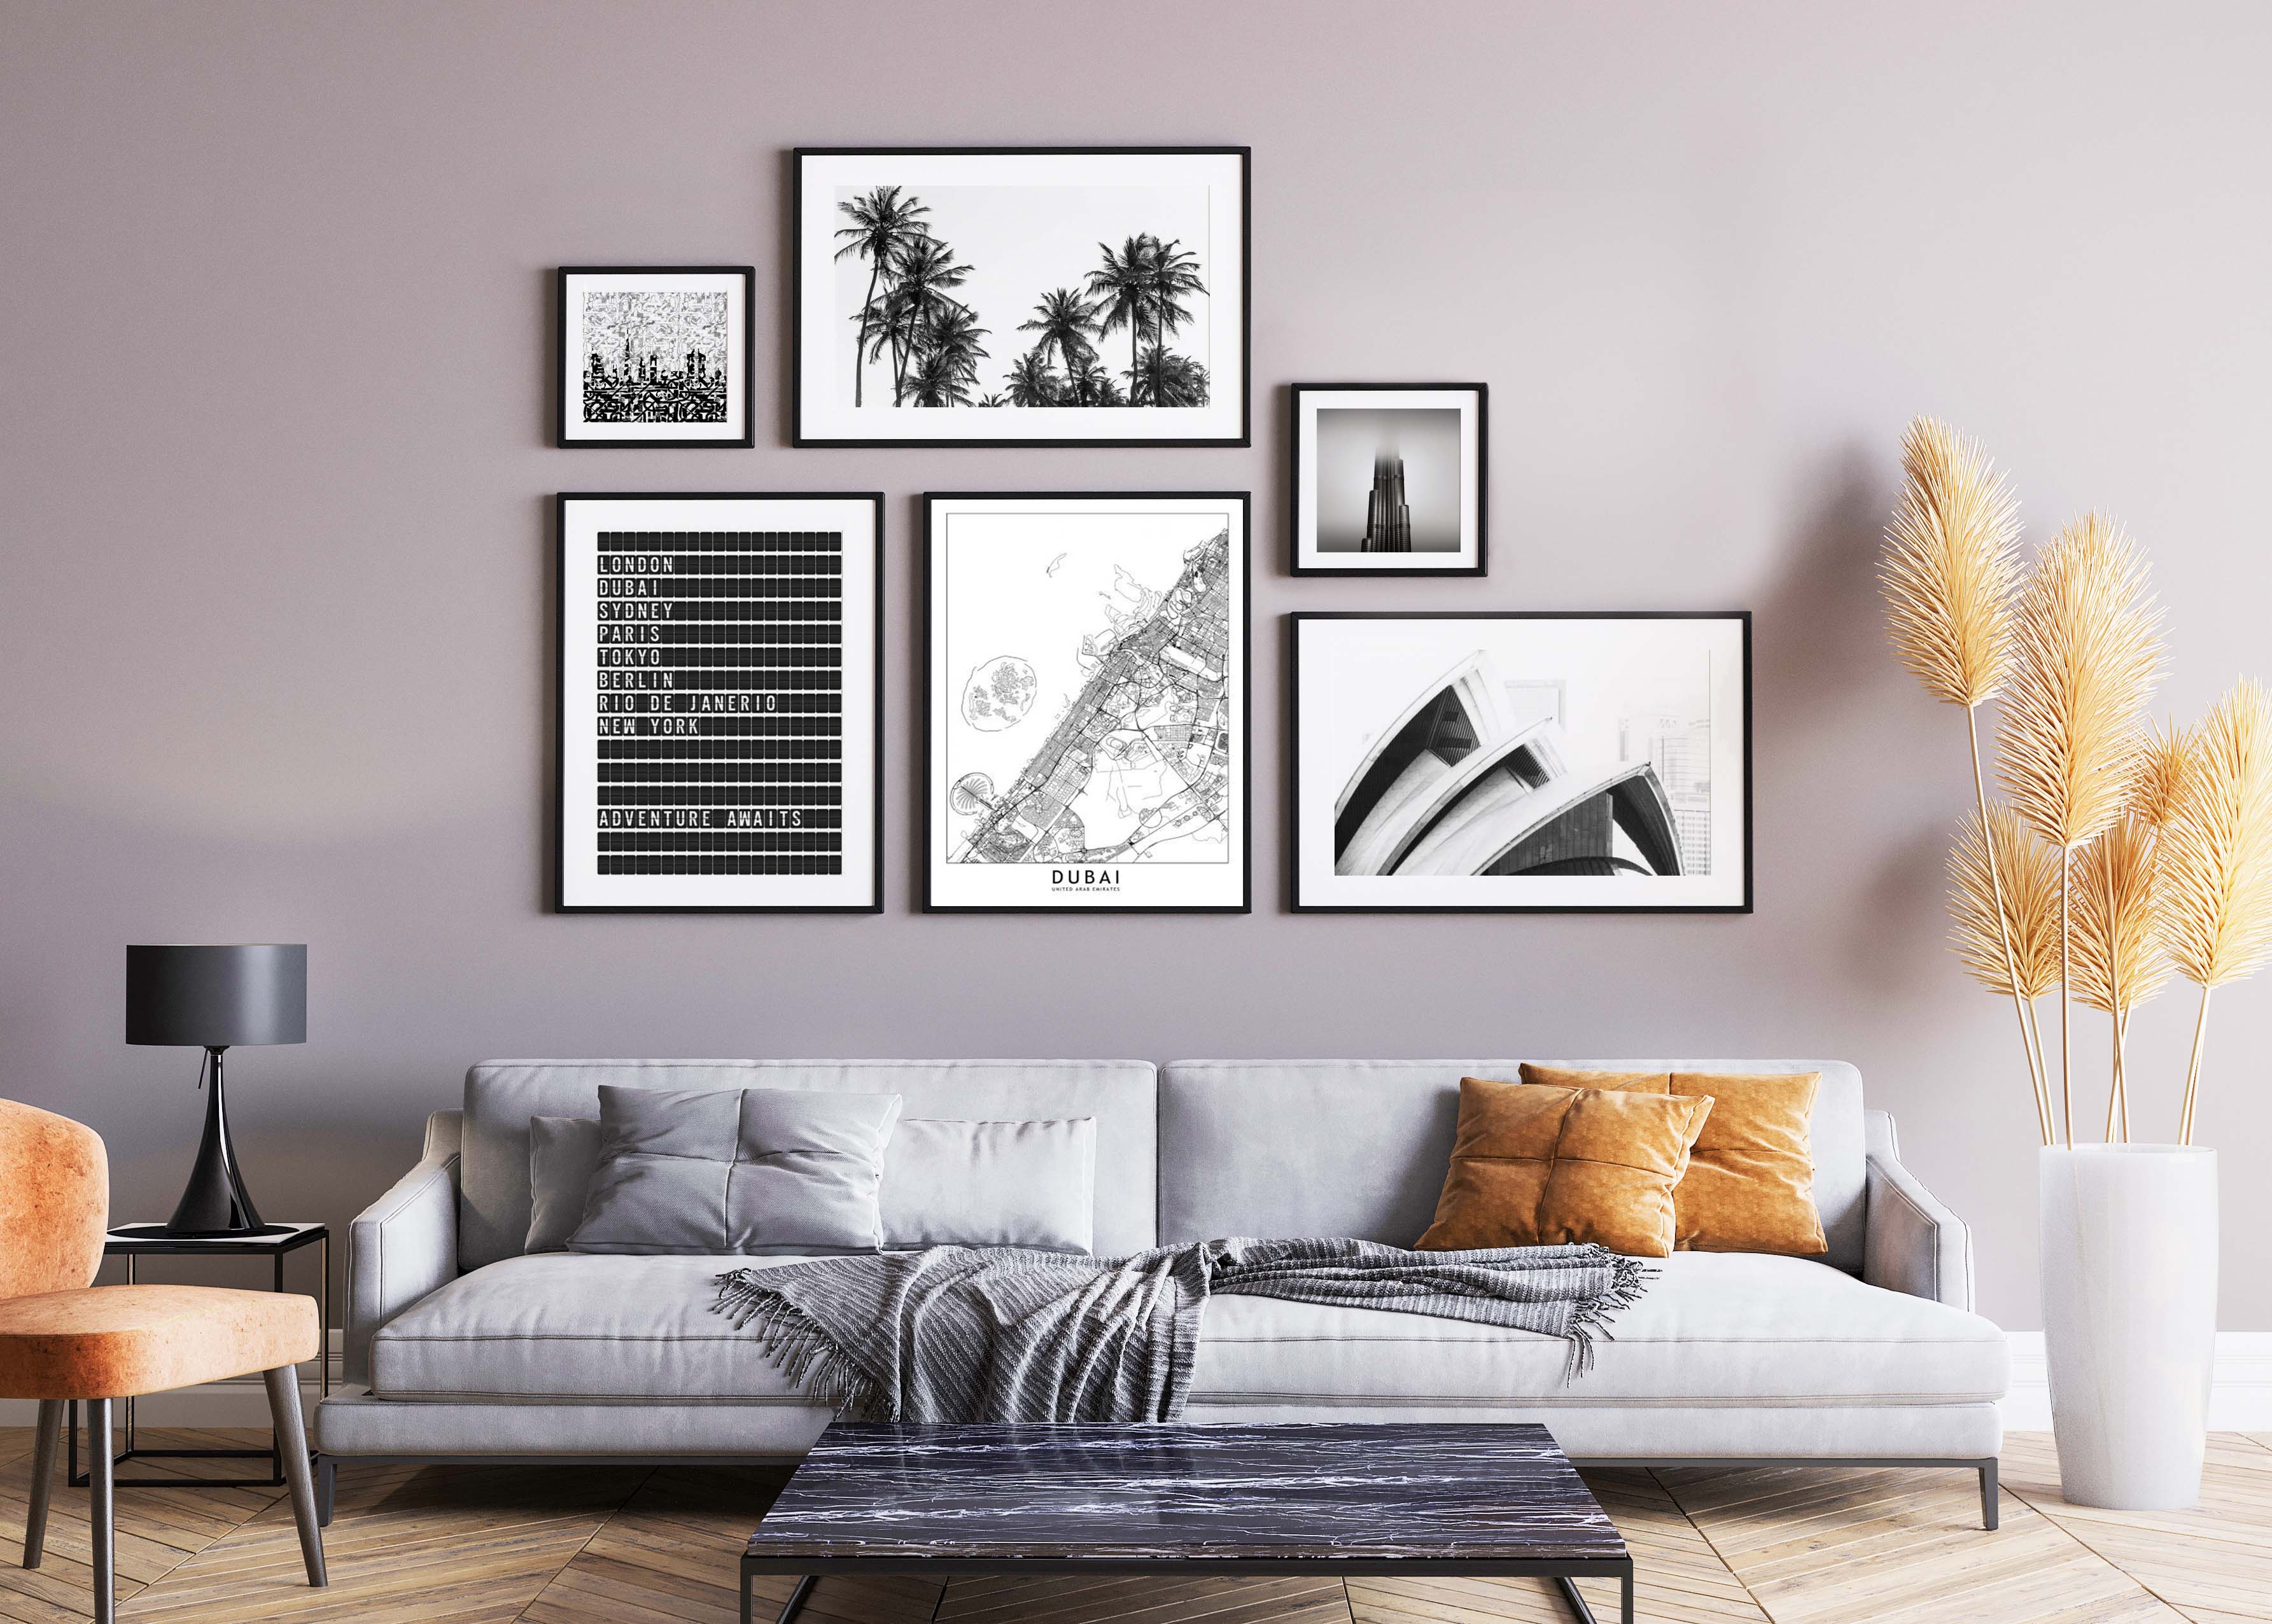 Wall Art Decor In Workspaces: Why You Need It